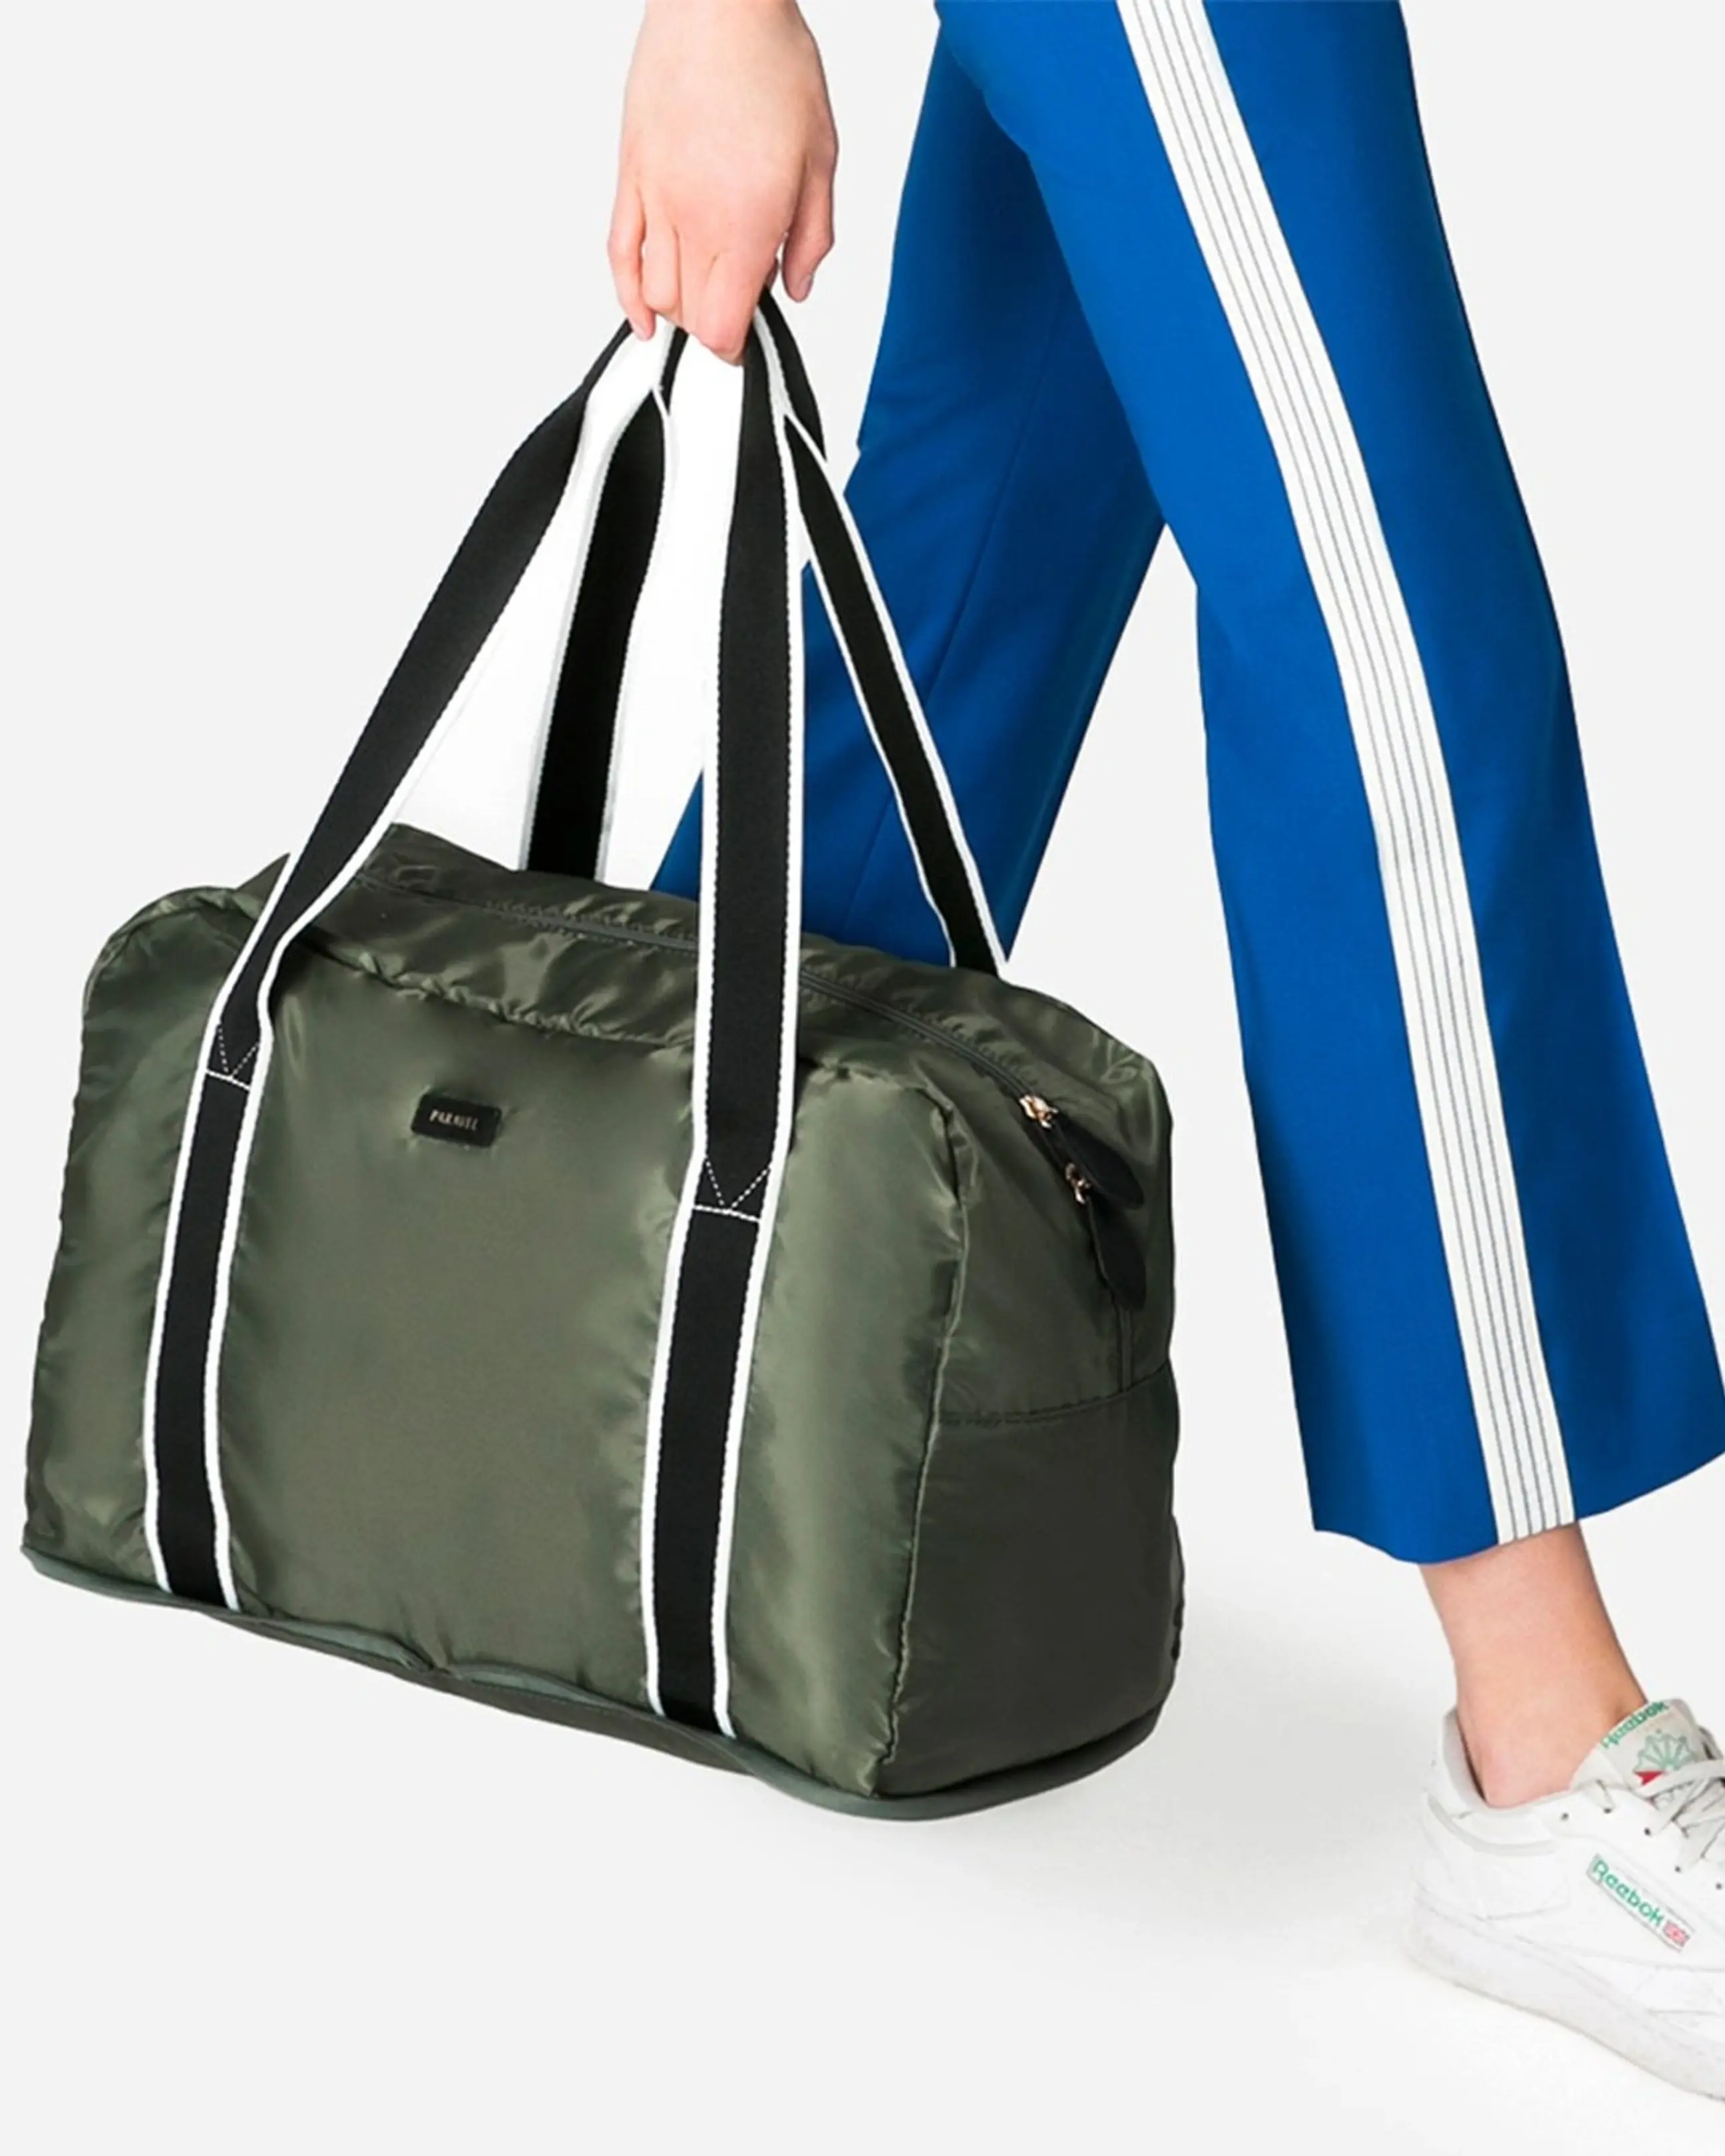 shoe bag for travel SNEAKER BAG Shoe Bag Gym/Travel Duffel Bag with up to 4 shoe compartments 